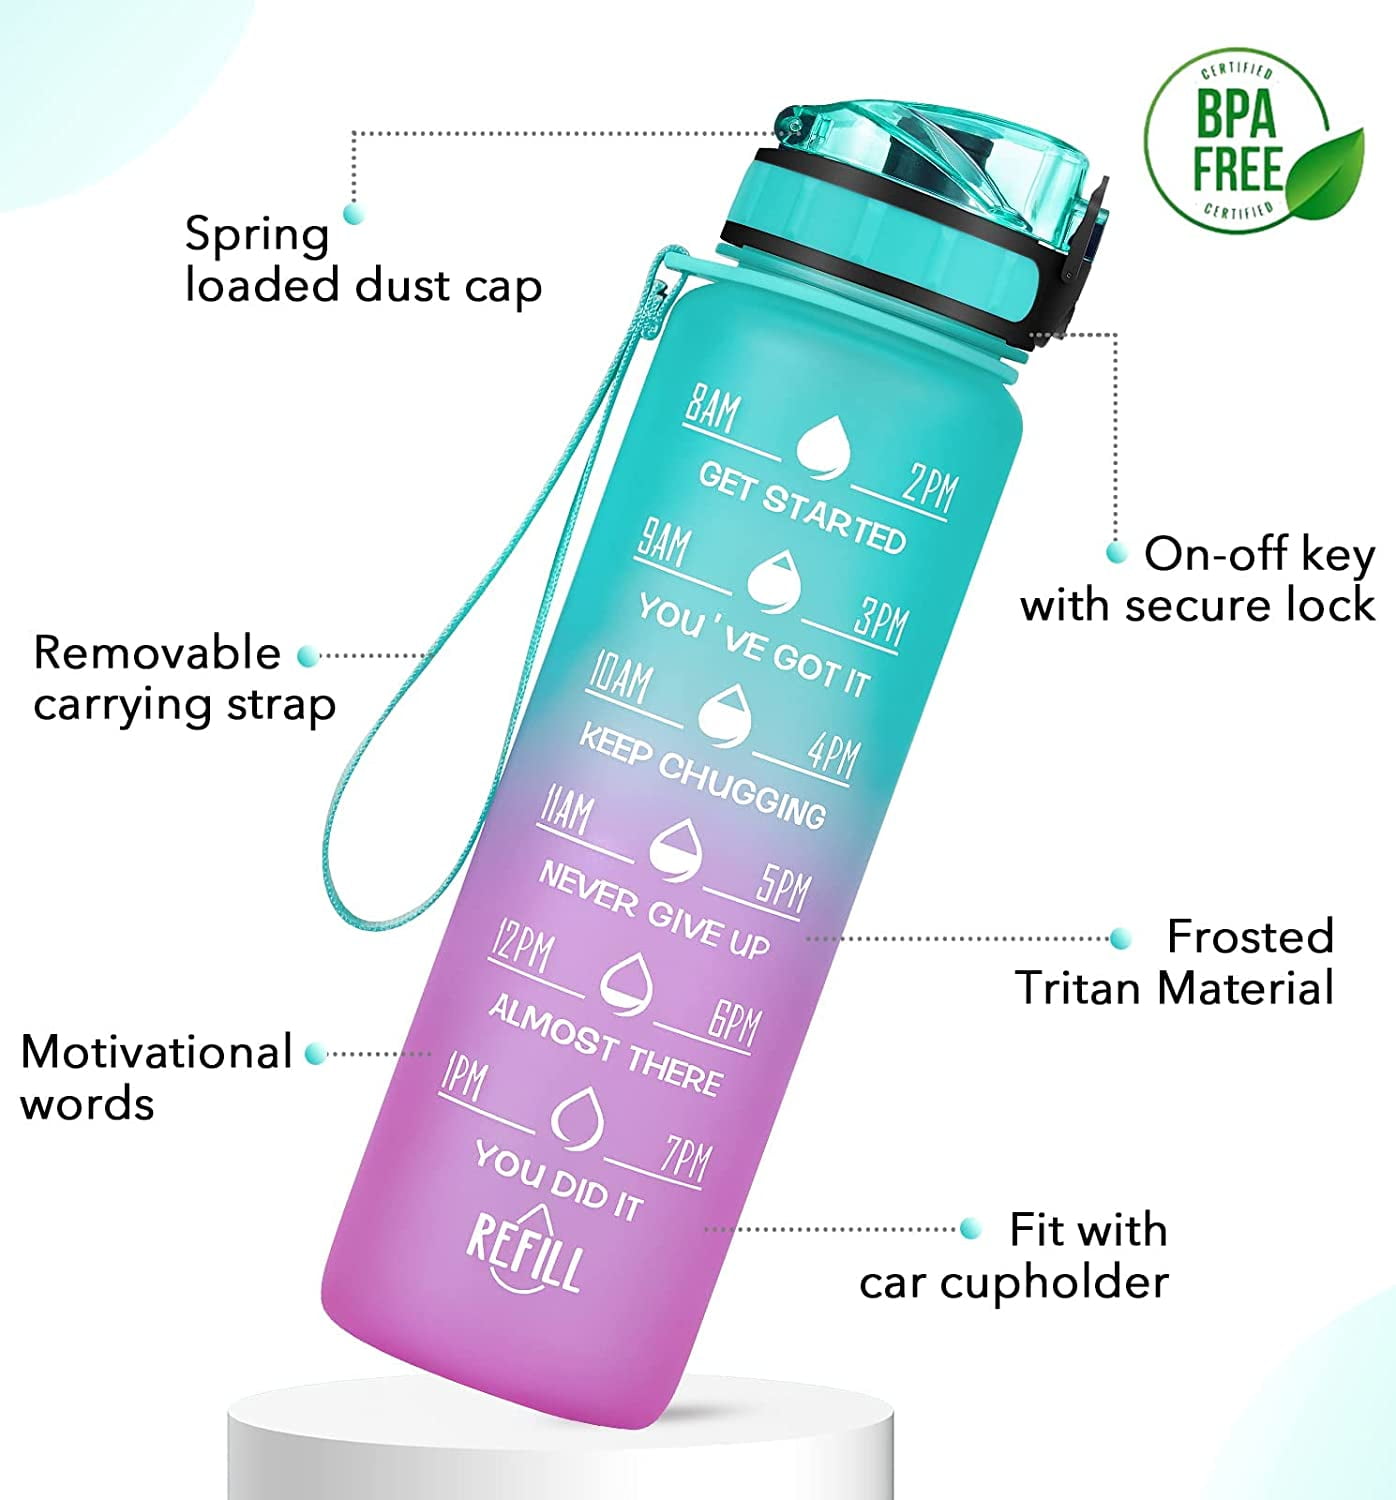 Arc Bottle Water Bottle with Time Marker - Motivational Water Bottles with Times to Drink - BPA Free Frosted Plastic - Gym, Sports, Outdoors (32oz